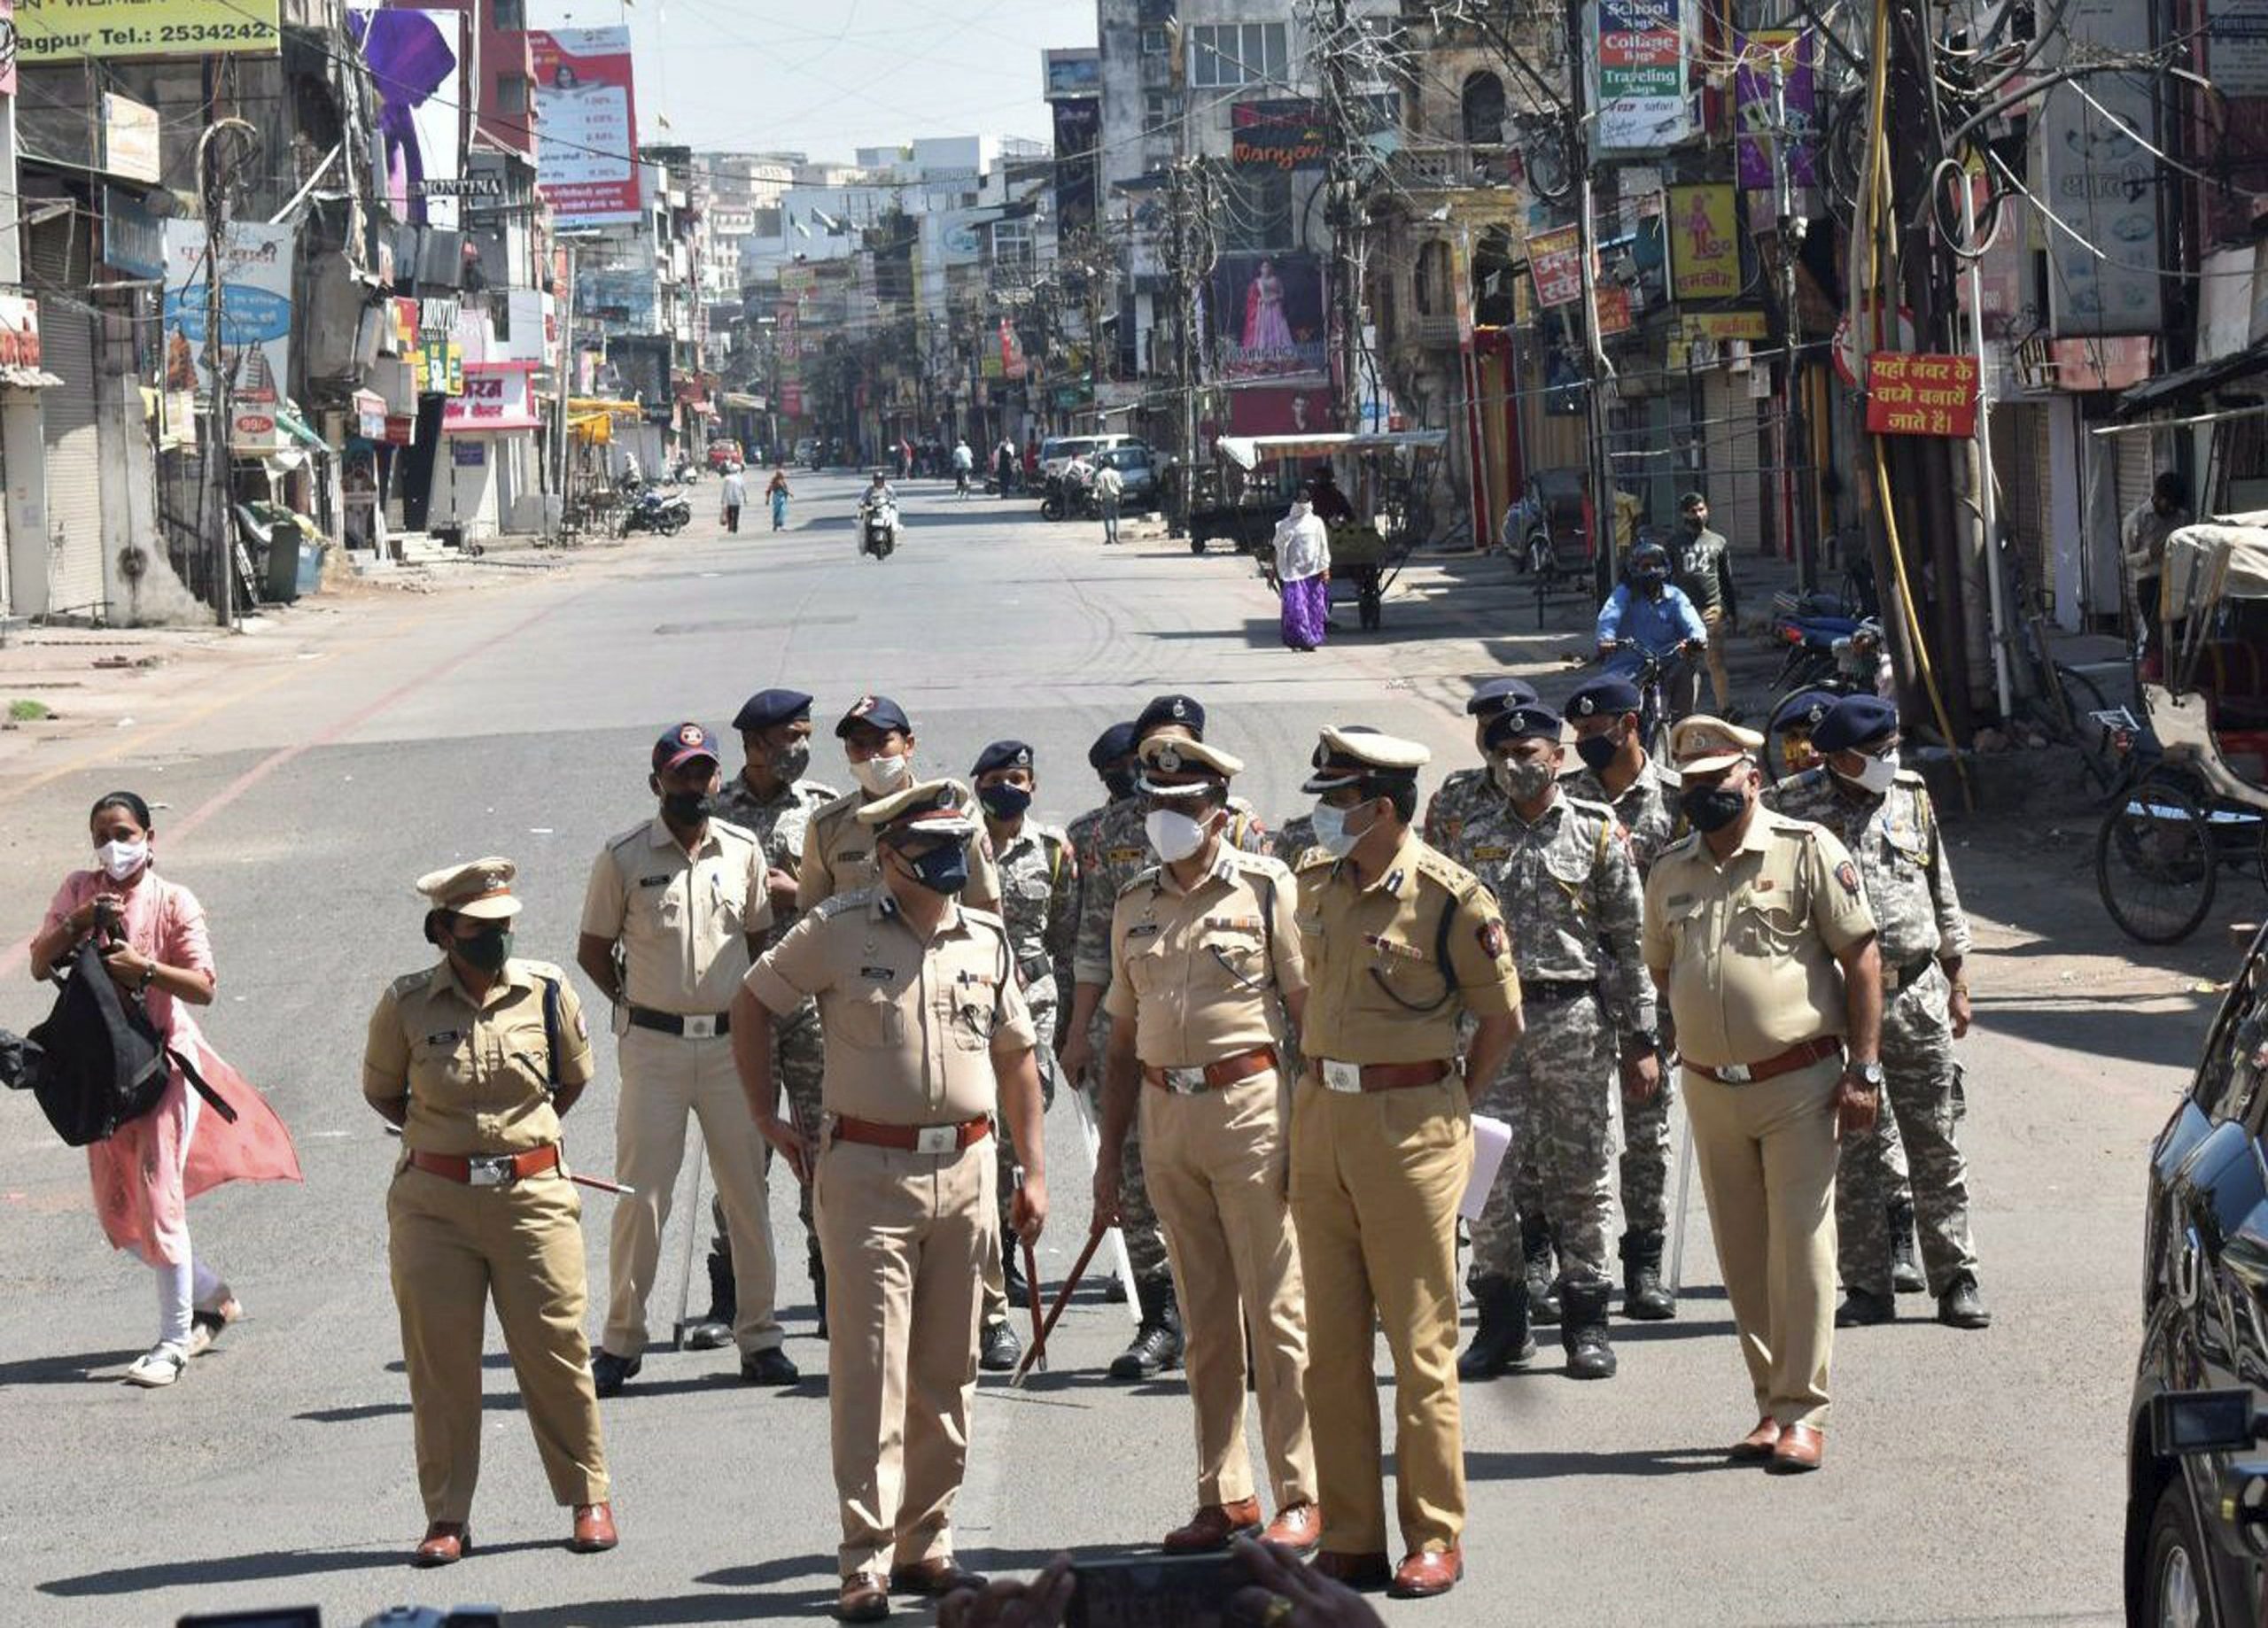 Tamil Nadu extends lockdown till March 31, authorities to enforce COVID-19 safety norms